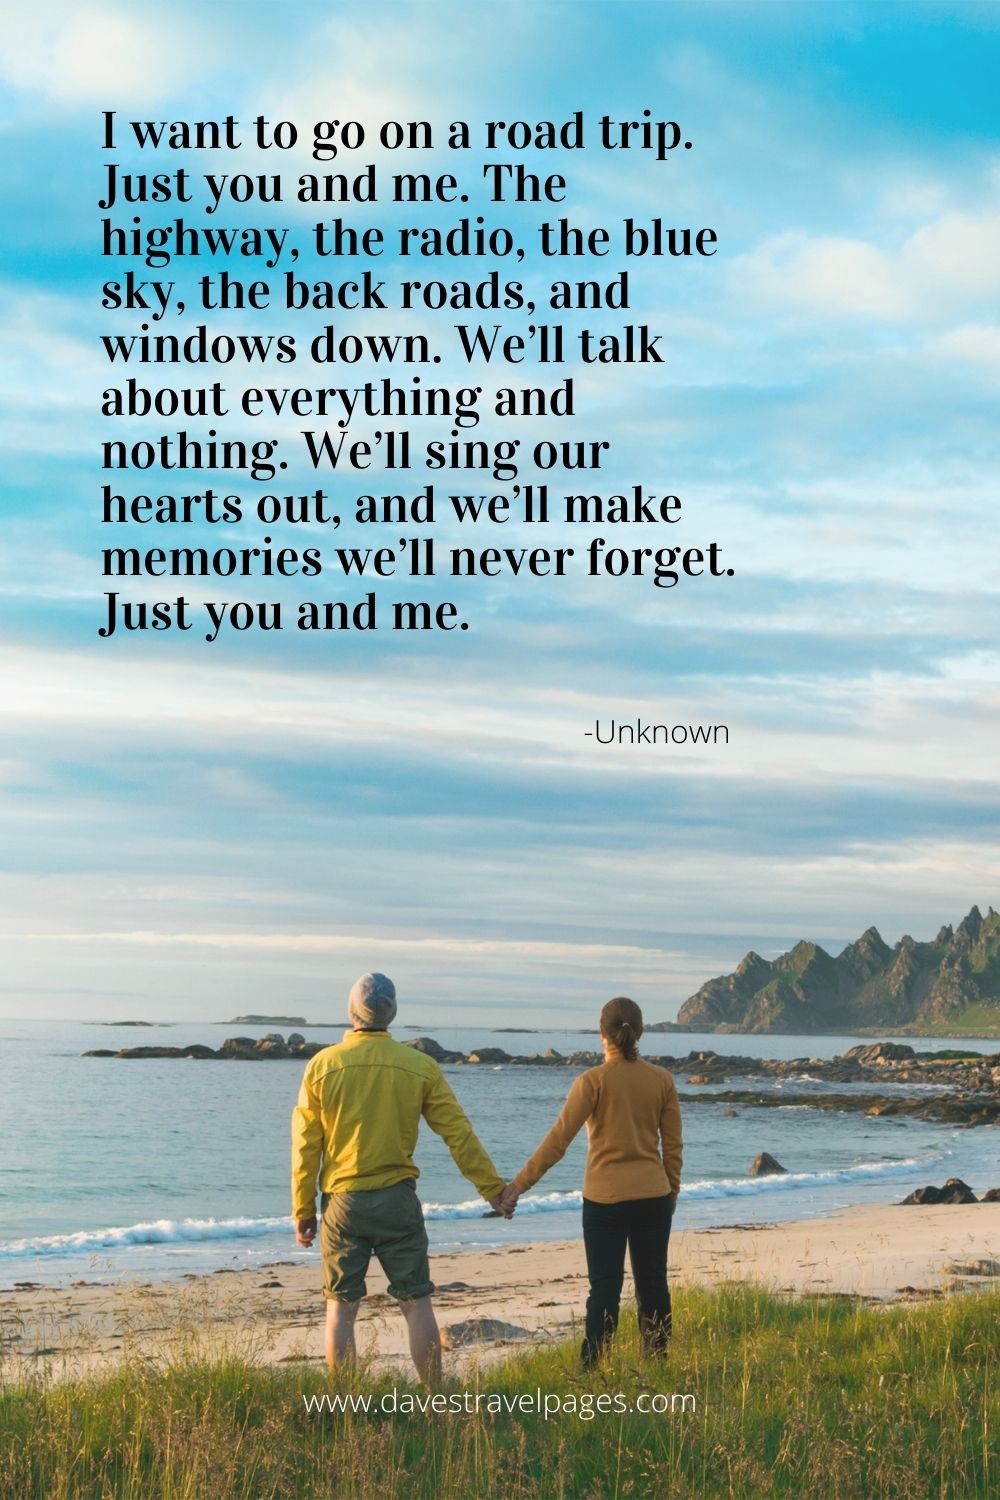 Romantic Travel Quote: I want to go on a road trip. Just you and me. The highway, the radio, the blue sky, the back roads, and windows down. We’ll talk about everything and nothing. We’ll sing our hearts out, and we’ll make memories we’ll never forget. Just you and me.